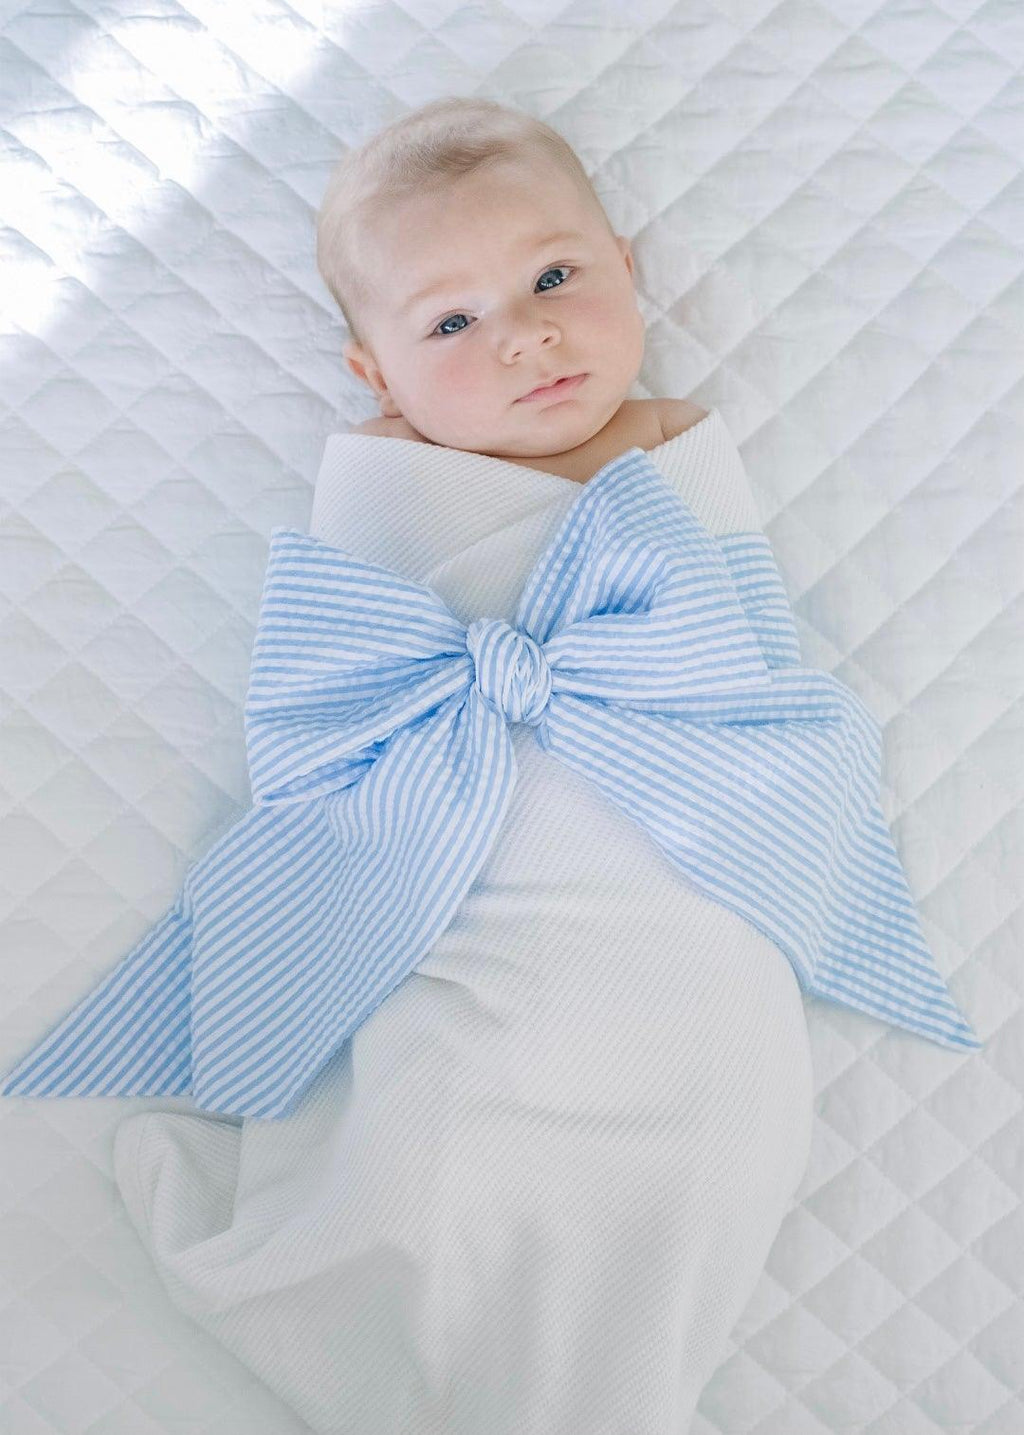 Swaddle Bow- Blue Seersucker | Nashville Bow Co. - Classic Hair Bows, Bow Ties, Basket Bows, Pacifier Clips, Wreath Sashes, Swaddle Bows. Classic Southern Charm.